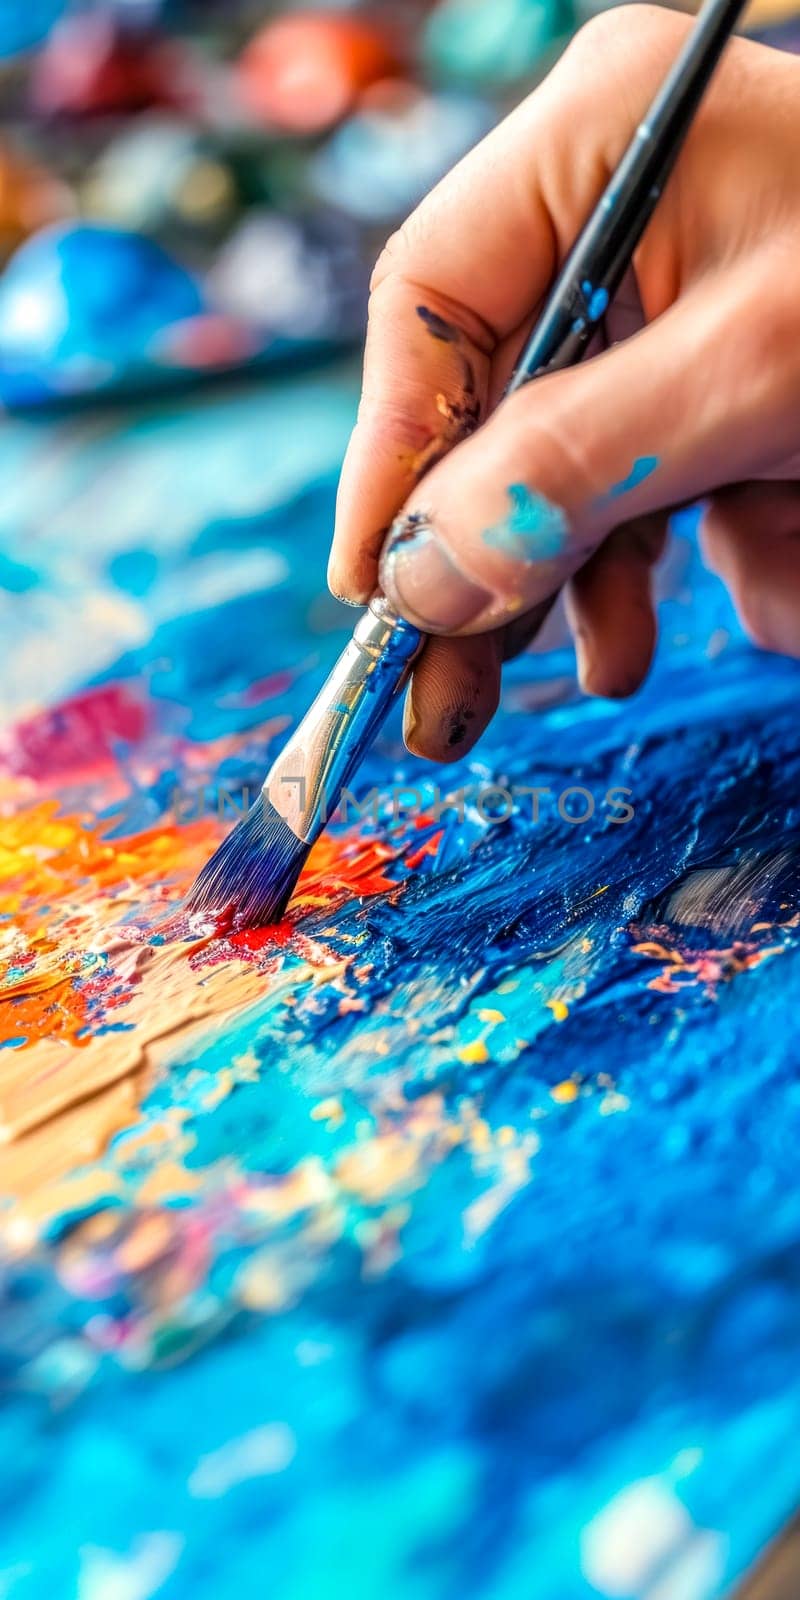 Artist's hand painting vivid hues on canvas, a dance of red and blue under creative spell by Edophoto